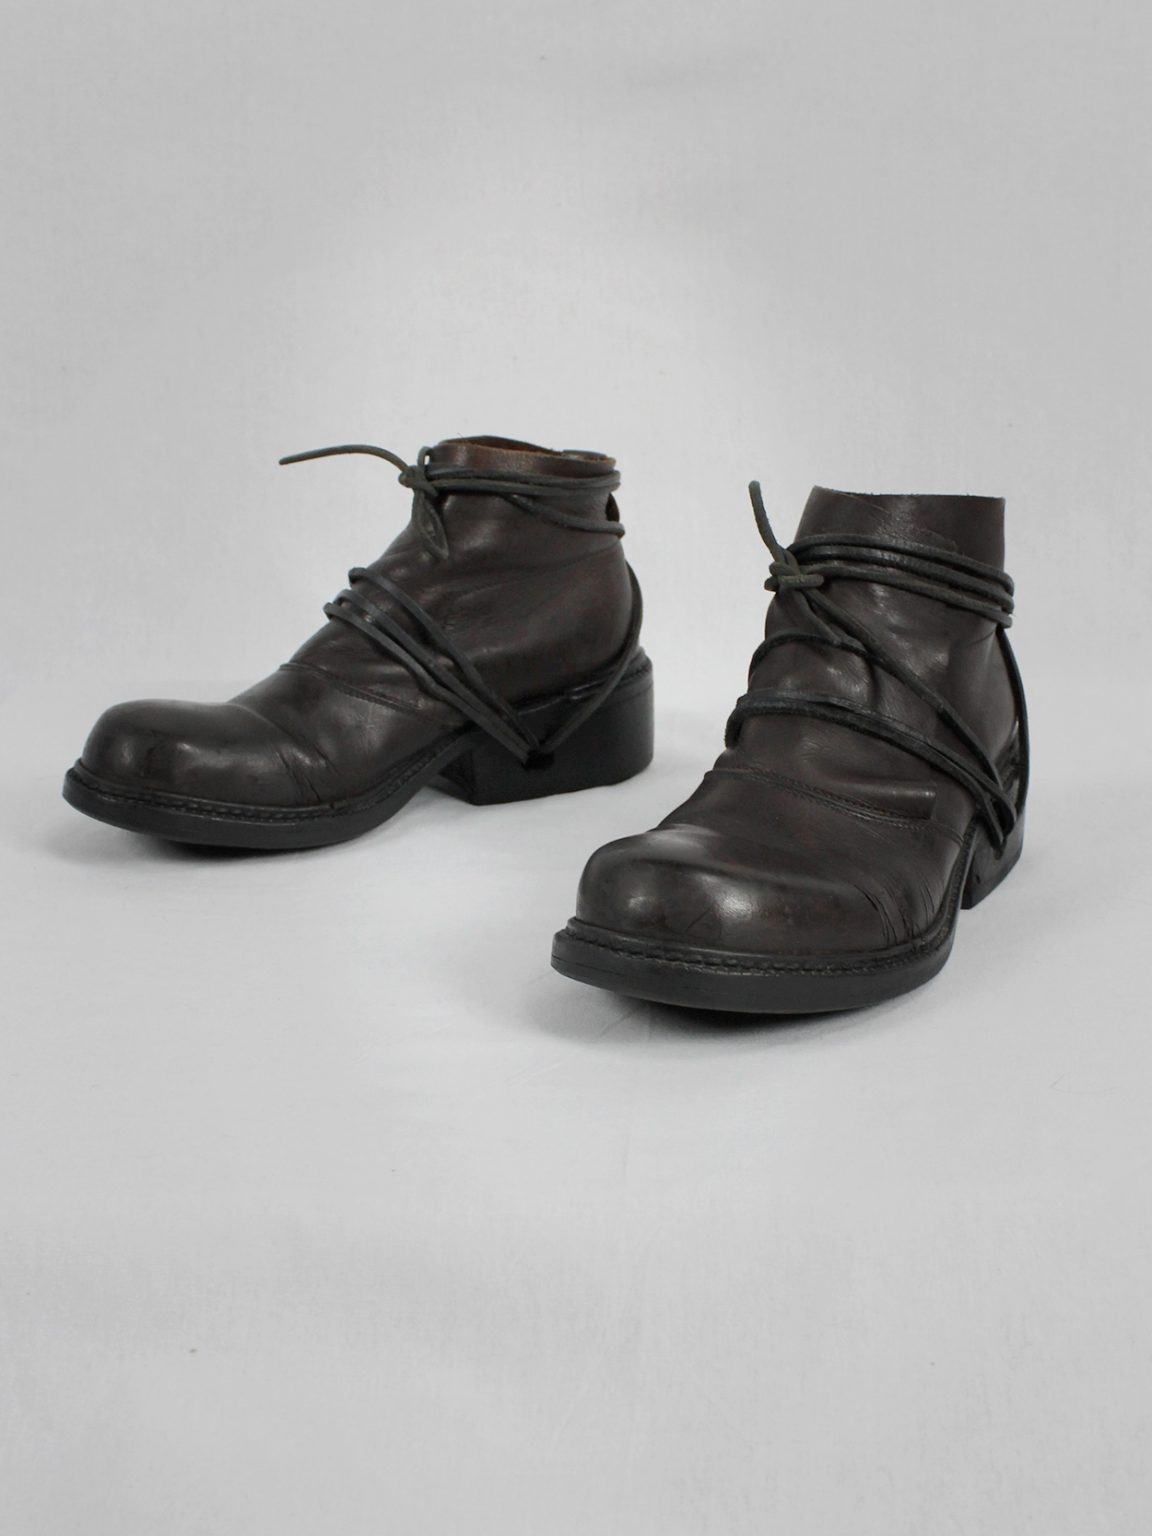 Dirk Bikkembergs brown boots with flap and laces through the soles (39) — late 90's